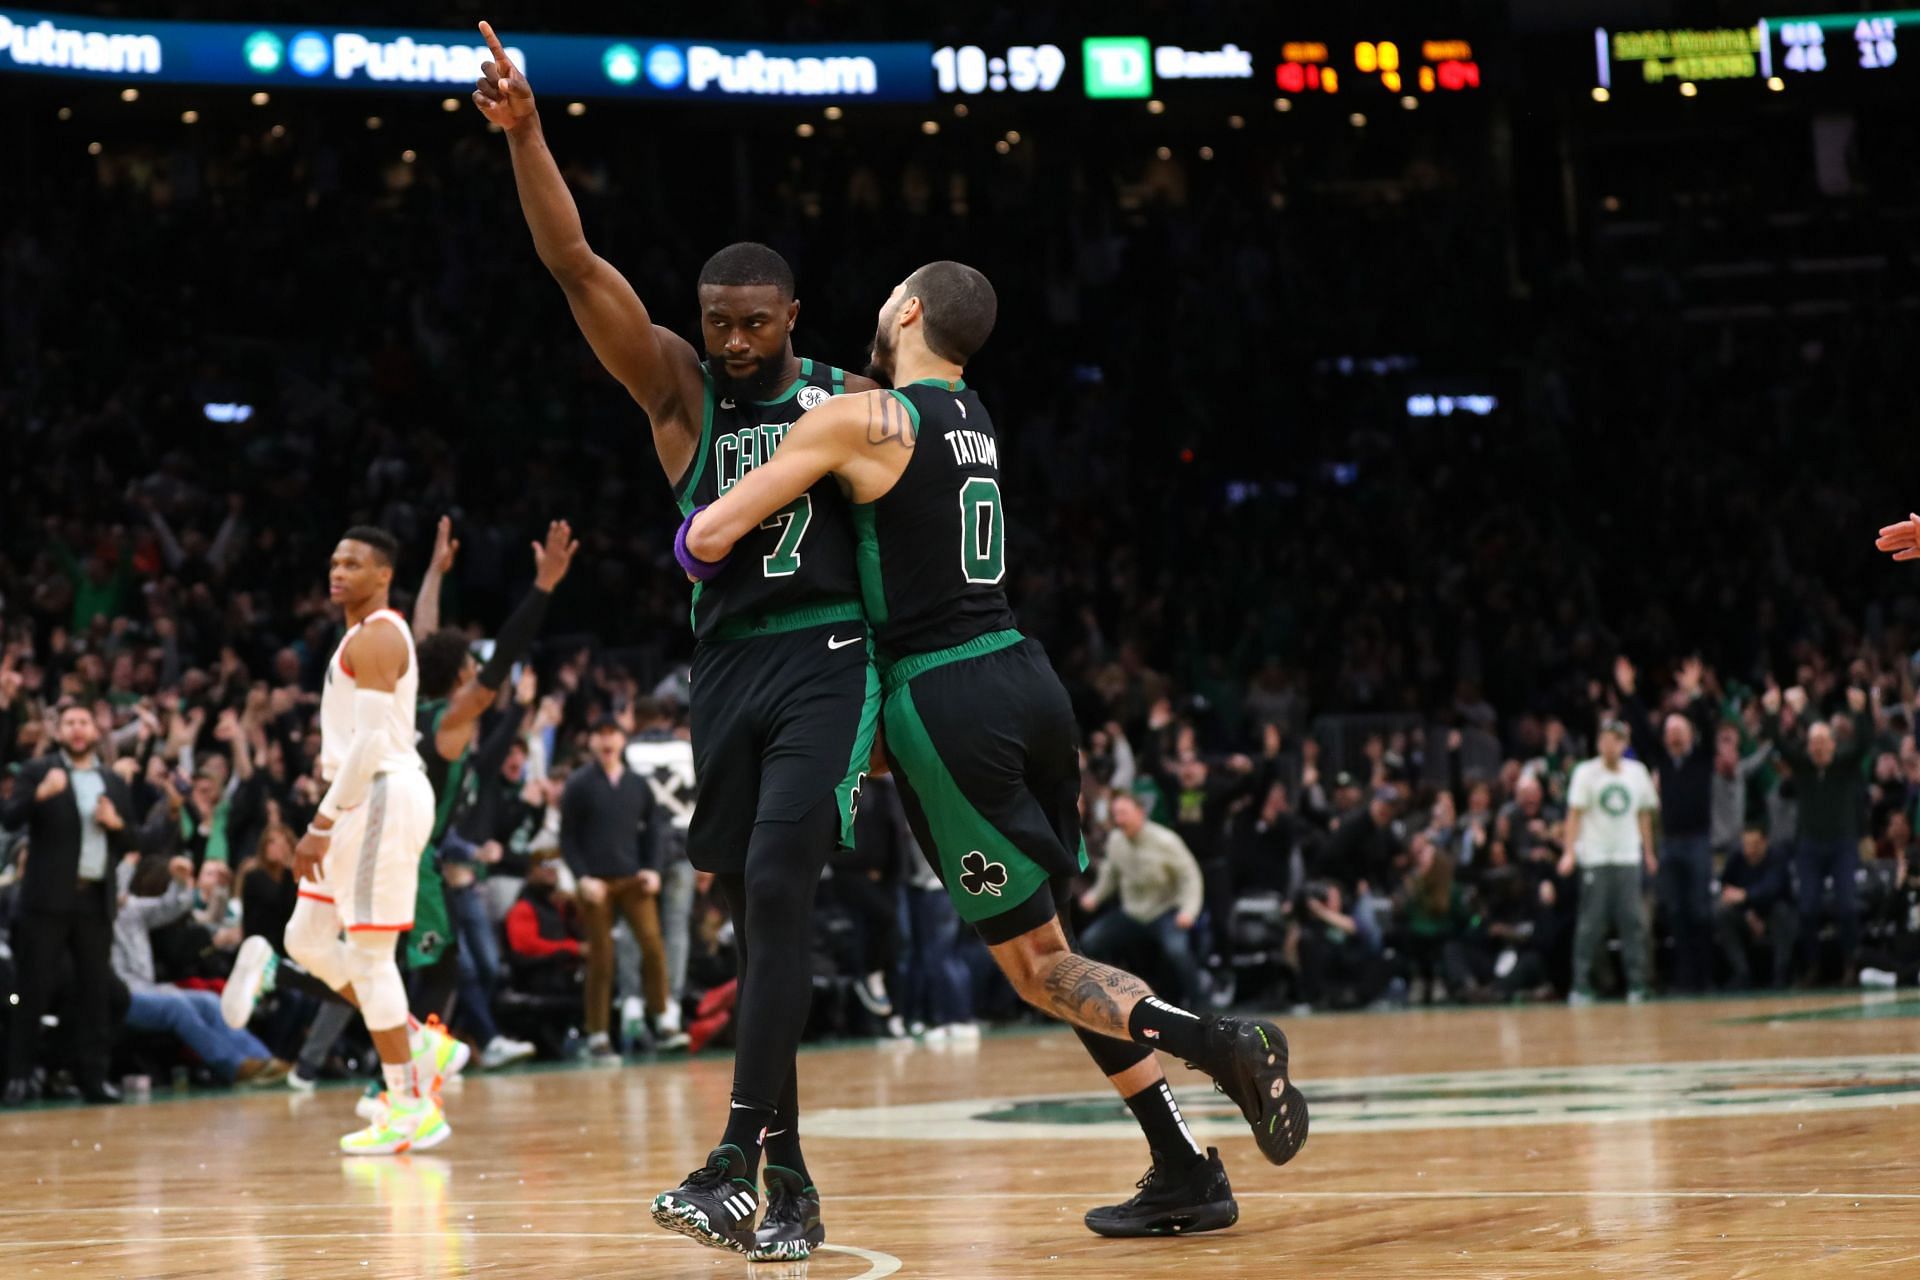 The Boston Celtics suffered a grueling opening-day home loss to the New York Knicks